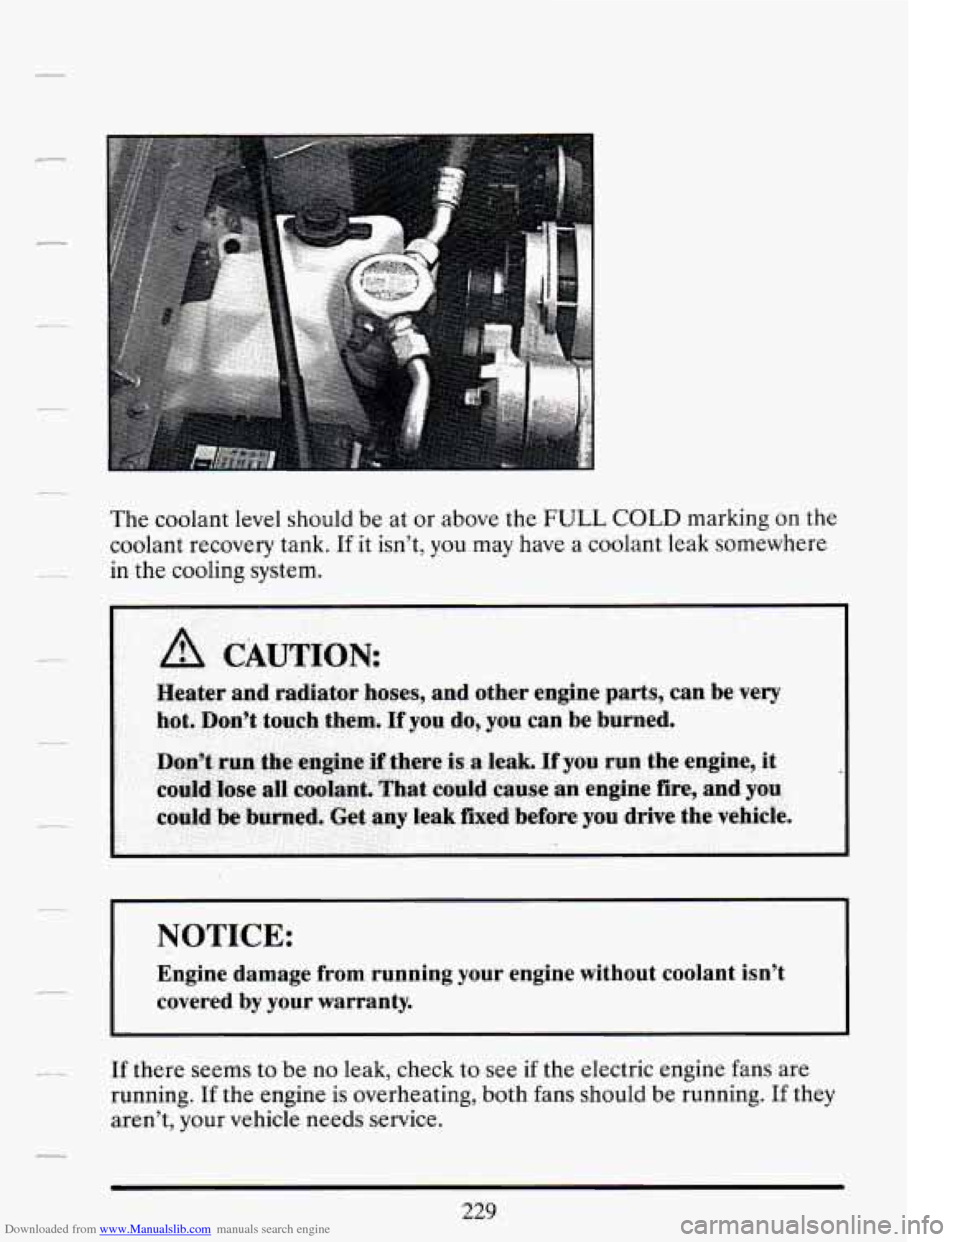 CADILLAC DEVILLE 1994 7.G Owners Manual Downloaded from www.Manualslib.com manuals search engine The coolant  level should  be at  or  above  the FULL COLD marking on the 
coolant  recovery  tank. 
If it isn’t,  you  may  have a coolant l